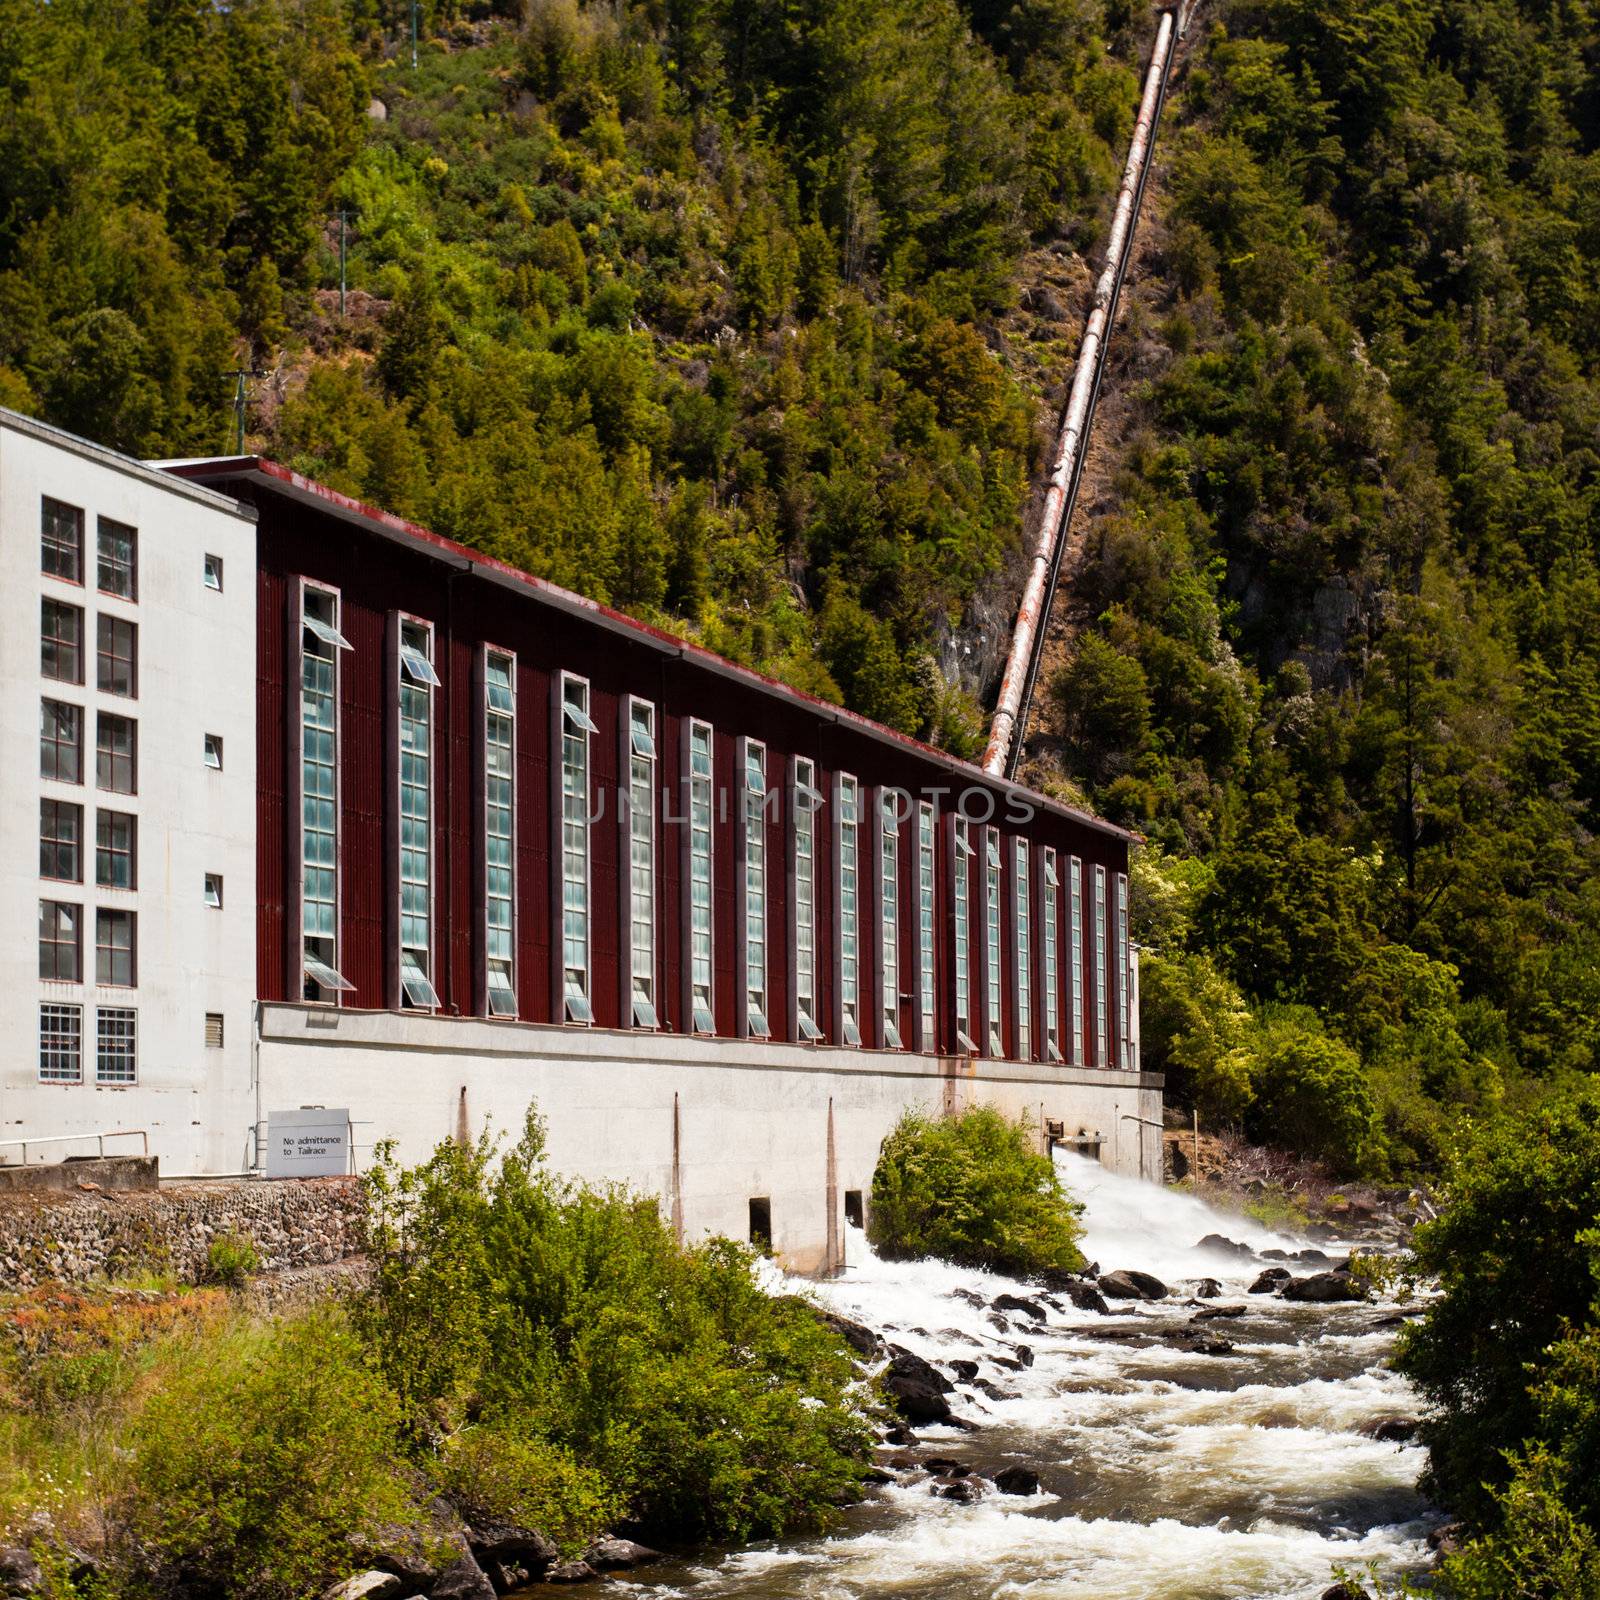 Generator house of hydro-electric power plant by PiLens